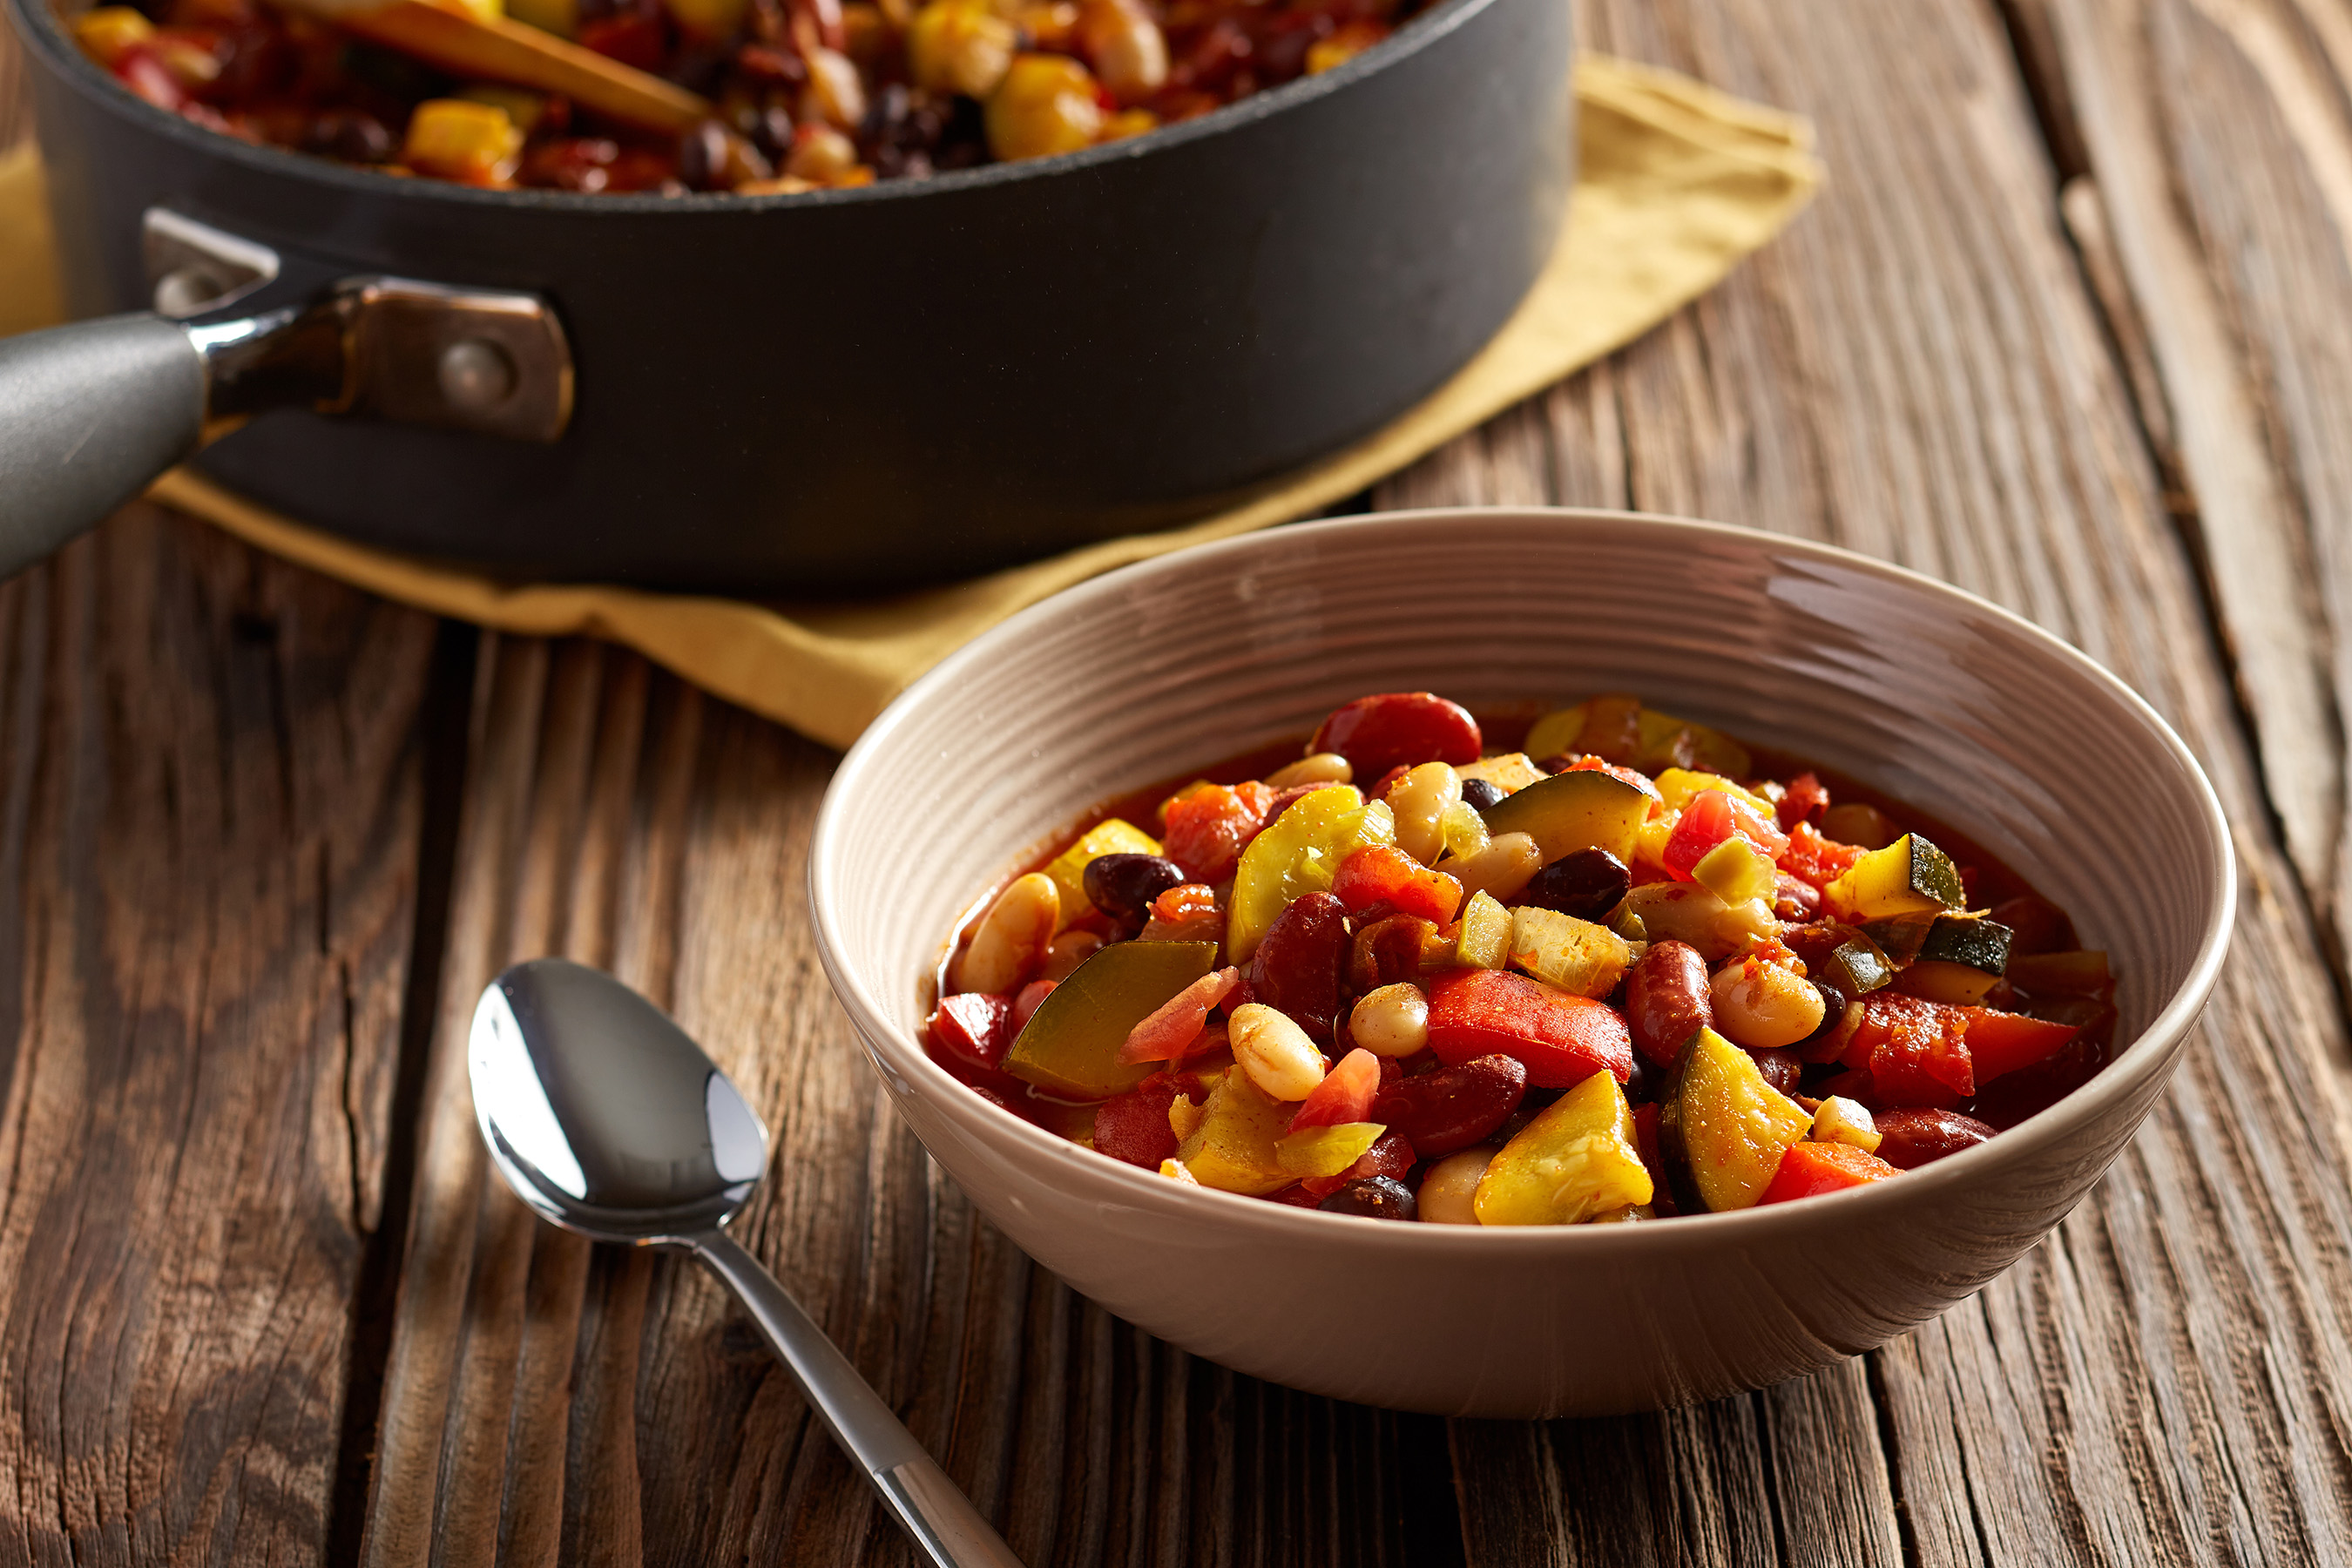 Cooking with pantry staple ingredients like Hunt’s tomatoes, Ro*Tel chiles and canned beans is a great way to add convenience and versatility to your cooking routine. Chef Catherine De Orio used simple canned ingredients to create this flavorful chili that’s perfect for leftovers. Check out Chef Catherine’s One Ingredient, Five Ways more ways to cook in with Hunt’s tomatoes!